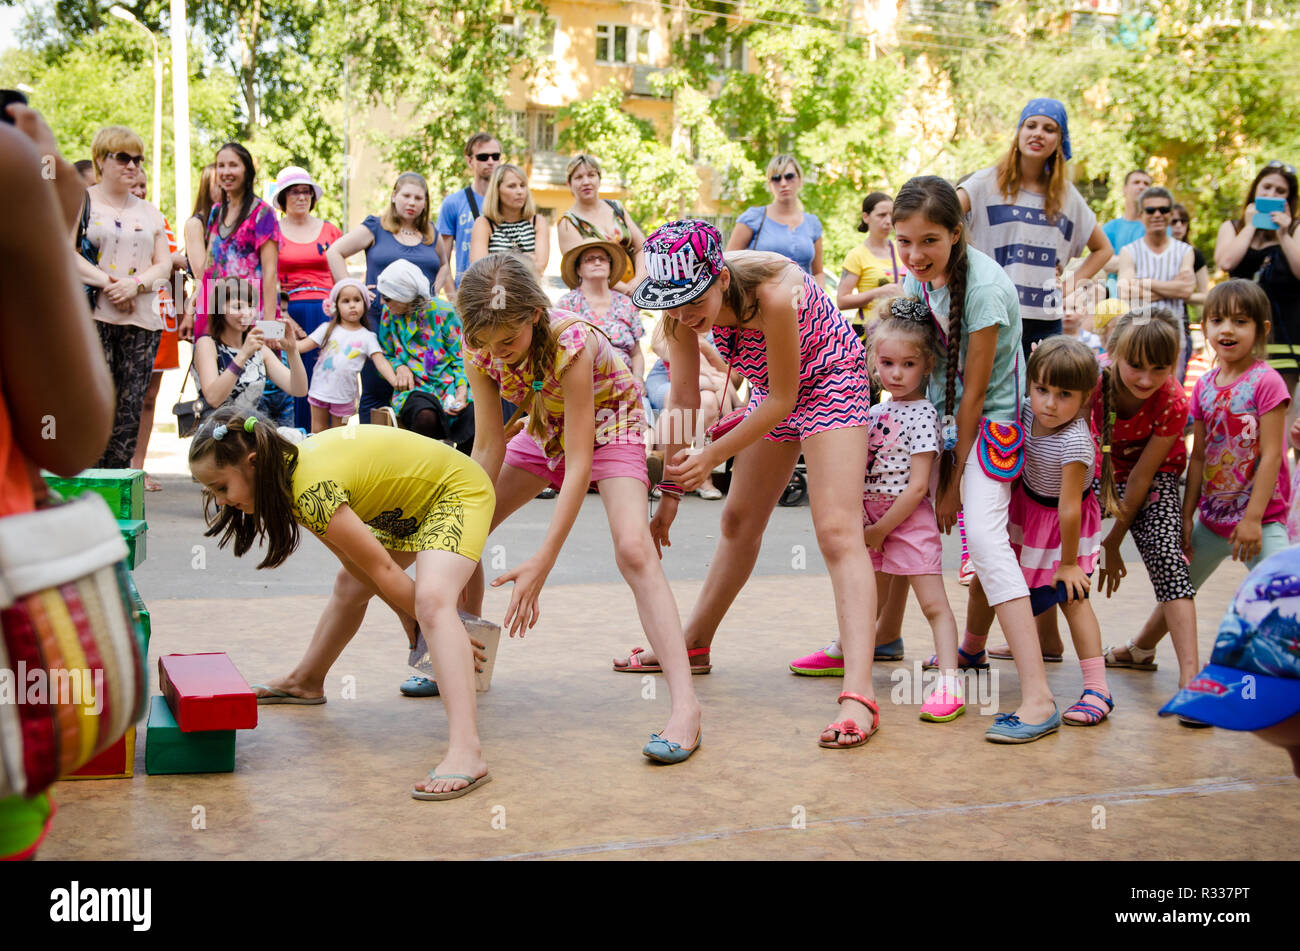 Komsomolsk-on-Amur, Russia - August 1, 2016. Public open Railroader's day. children playing fun game pass each other box between their legs at pirate  Stock Photo